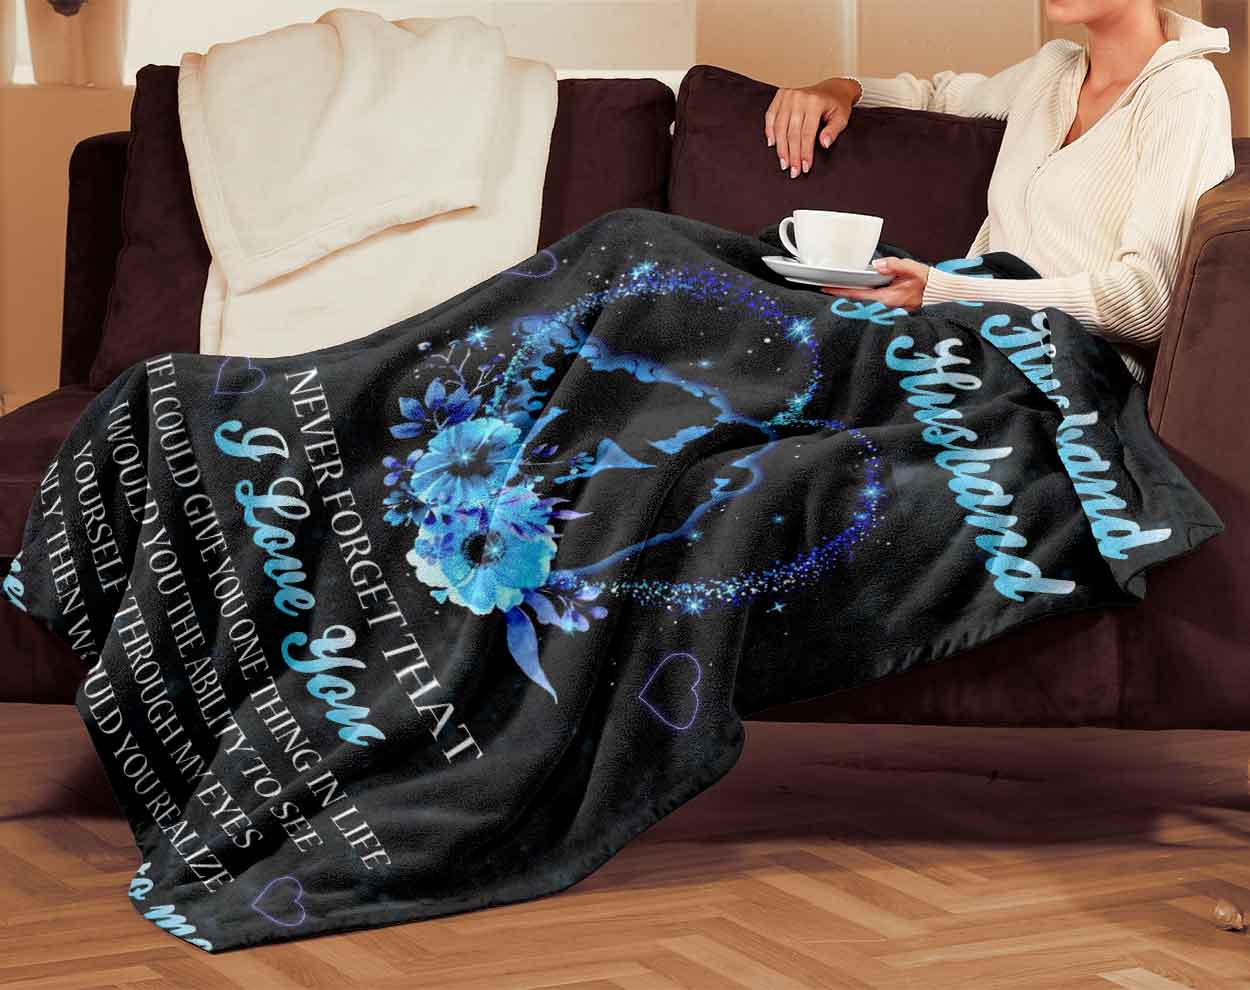 Skitongifts Blanket For Sofa Throws, Bed Throws Blanket - To My Husband Never Forget That I Love You How Special You Are To Me-TT1501